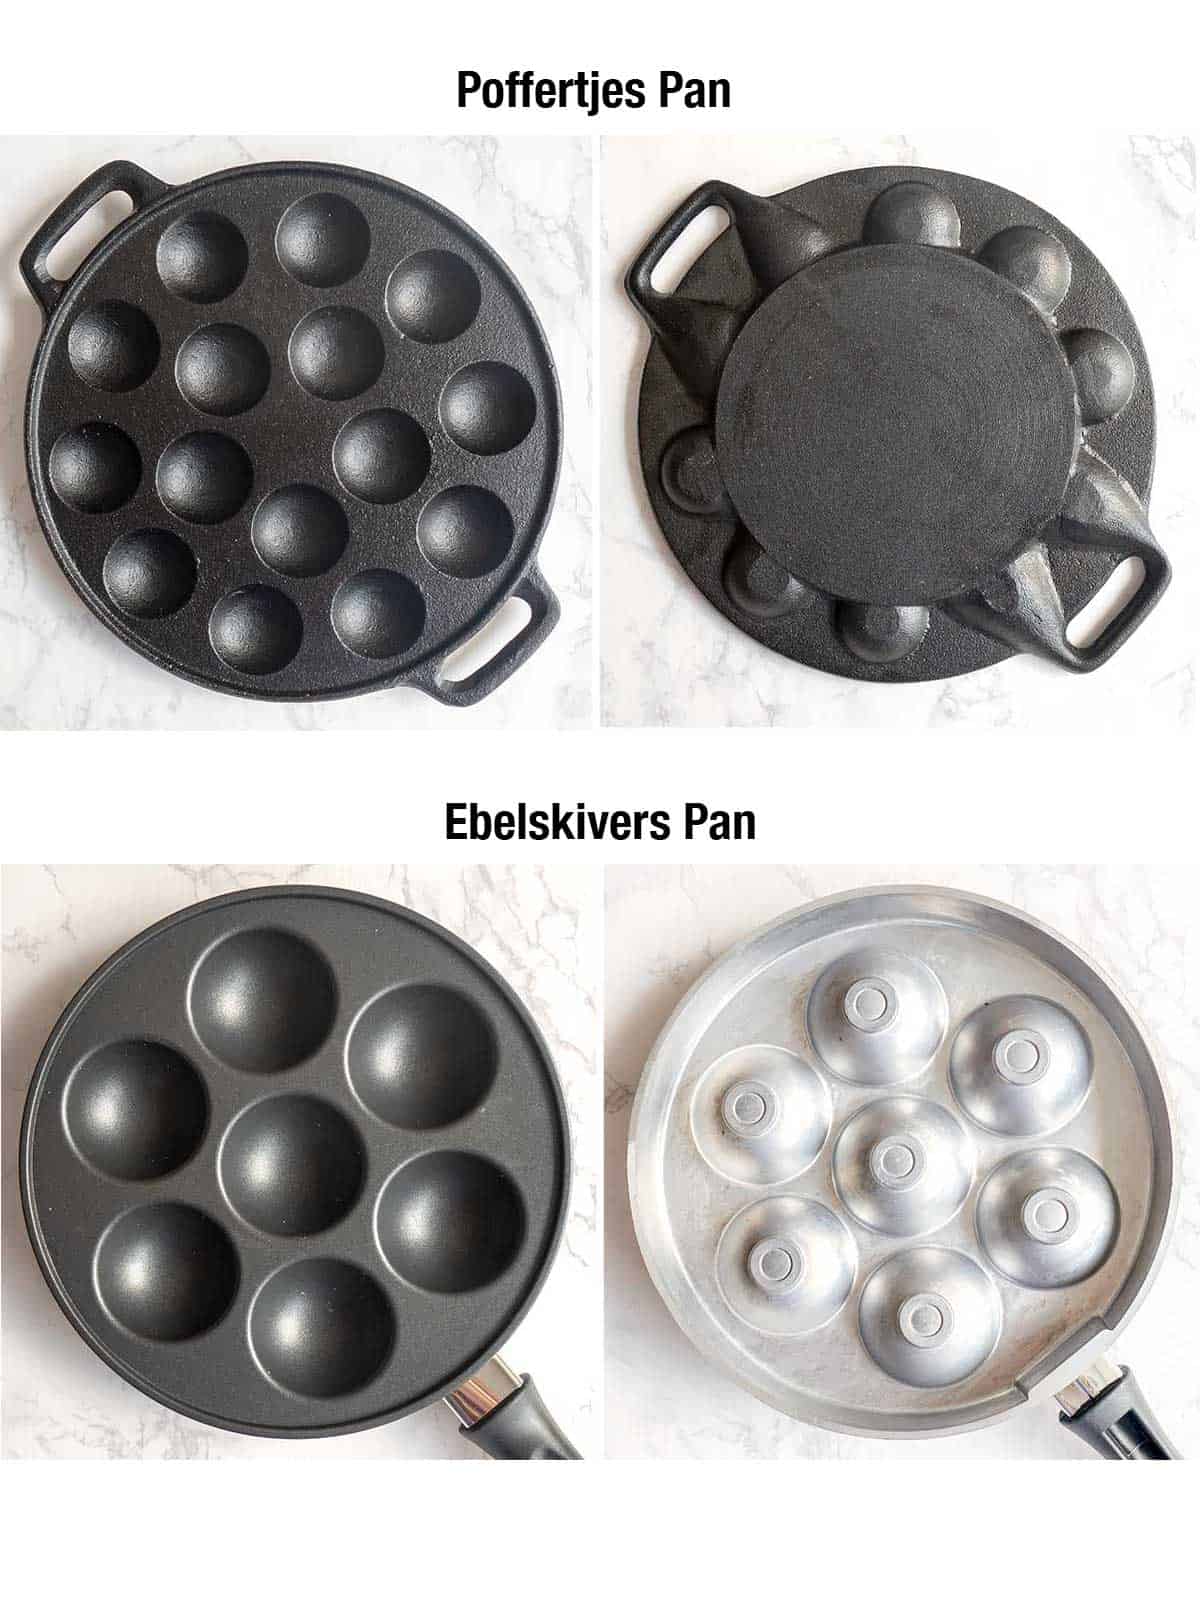 Comparison of Poffertjes pan with Ebelskivers Pan.